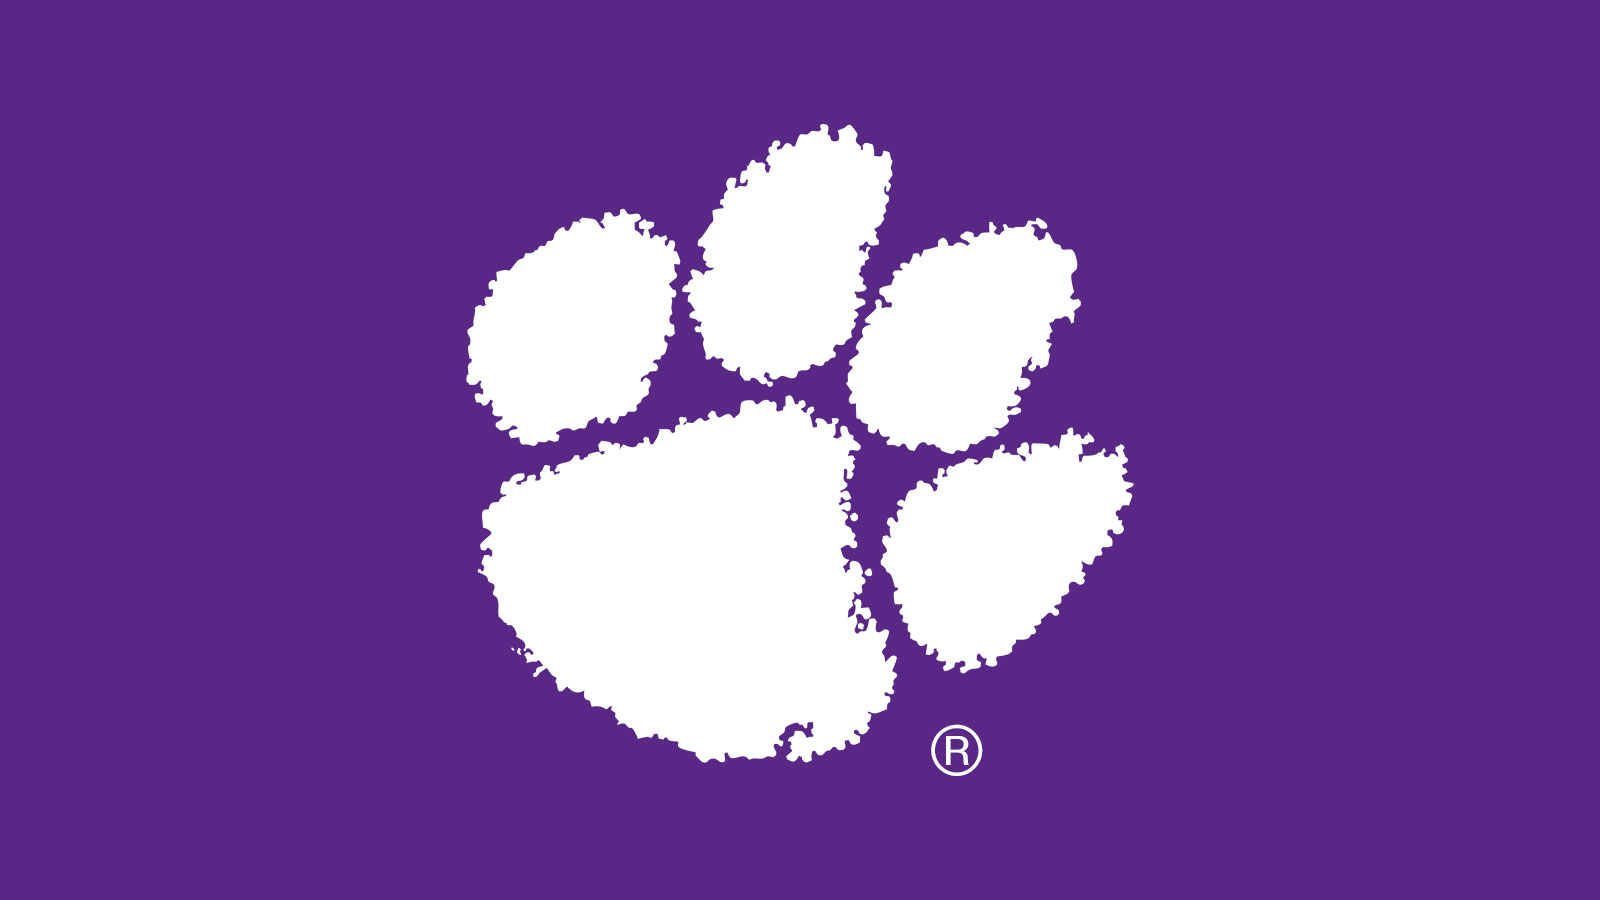 Thomas and Karen Chapman help shape students’ futures with their Clemson support